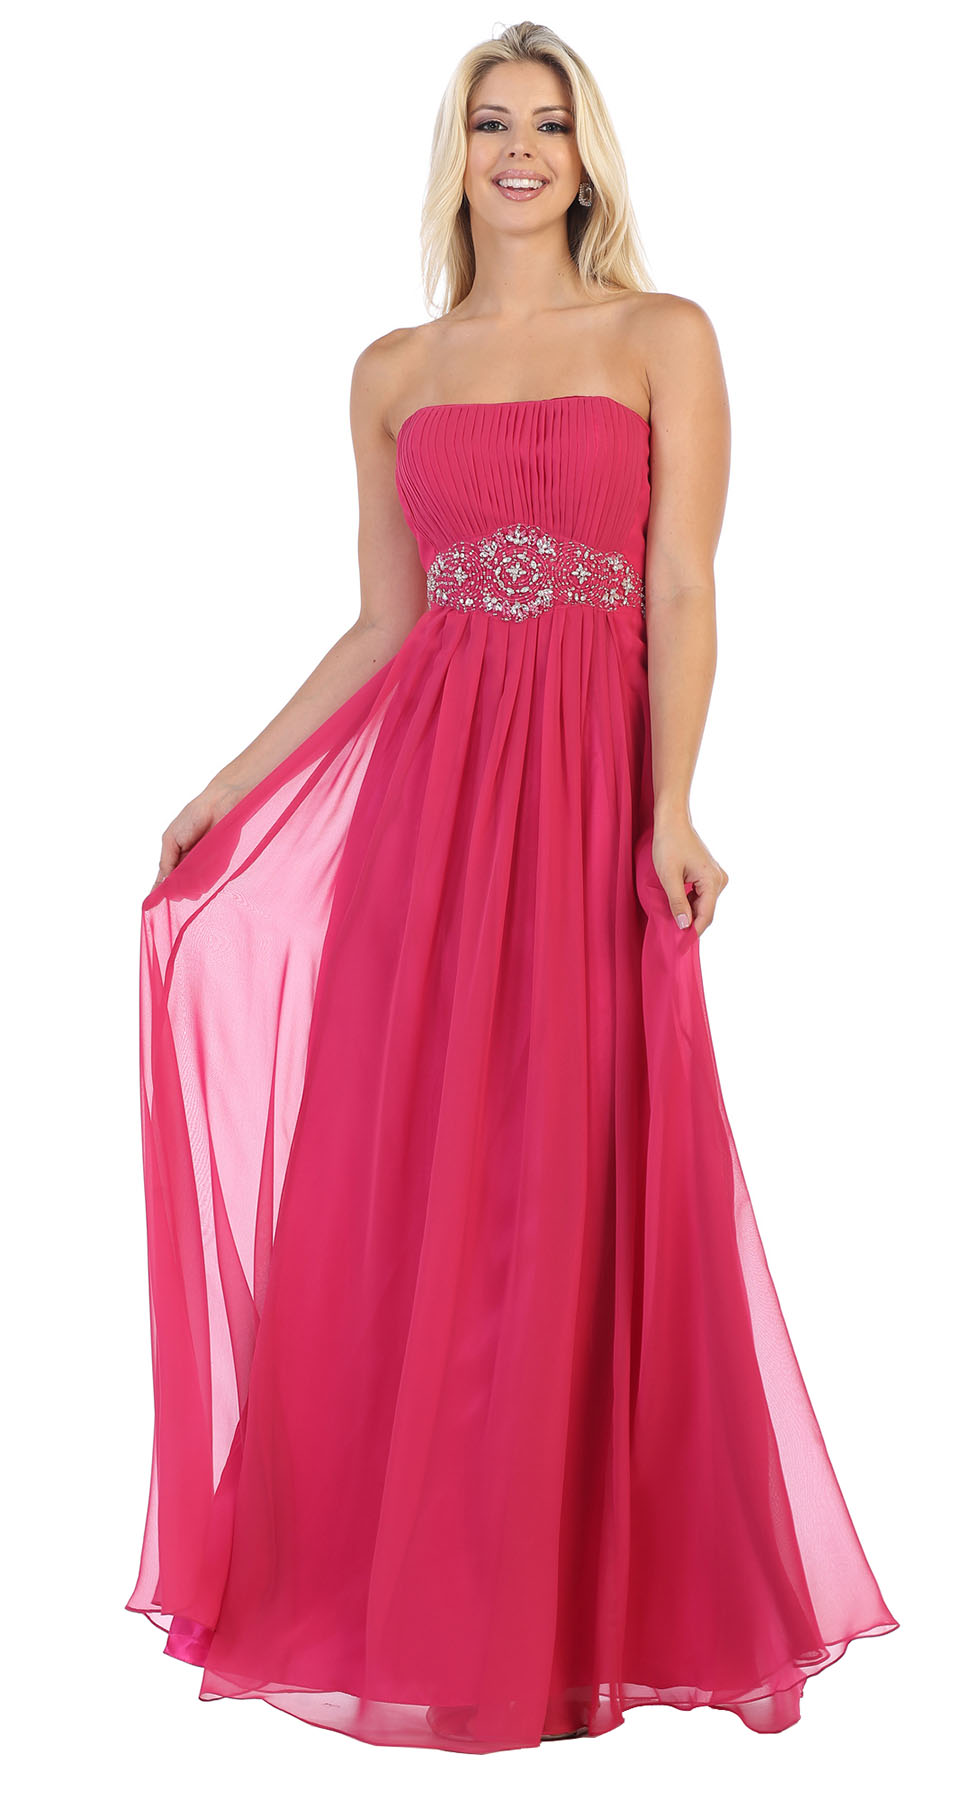  SALE  NEW STRAPLESS BRIDESMAID  FORMAL GOWN  UNDER 100 